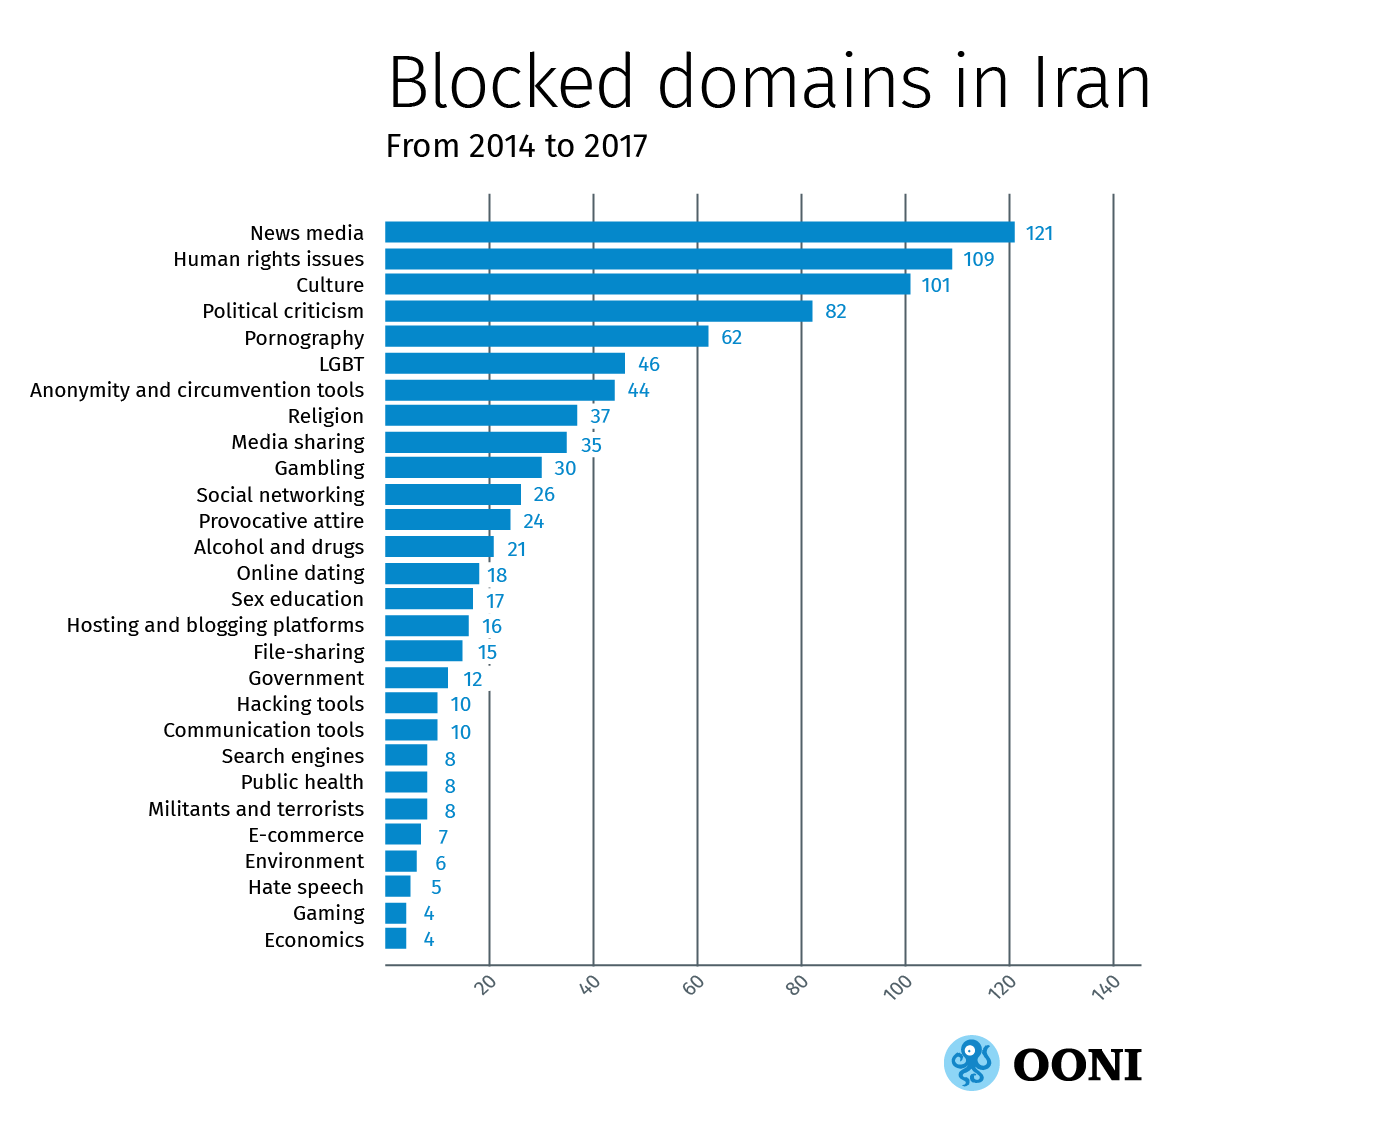 Graph of blocked domains in Iran, 2014-2017